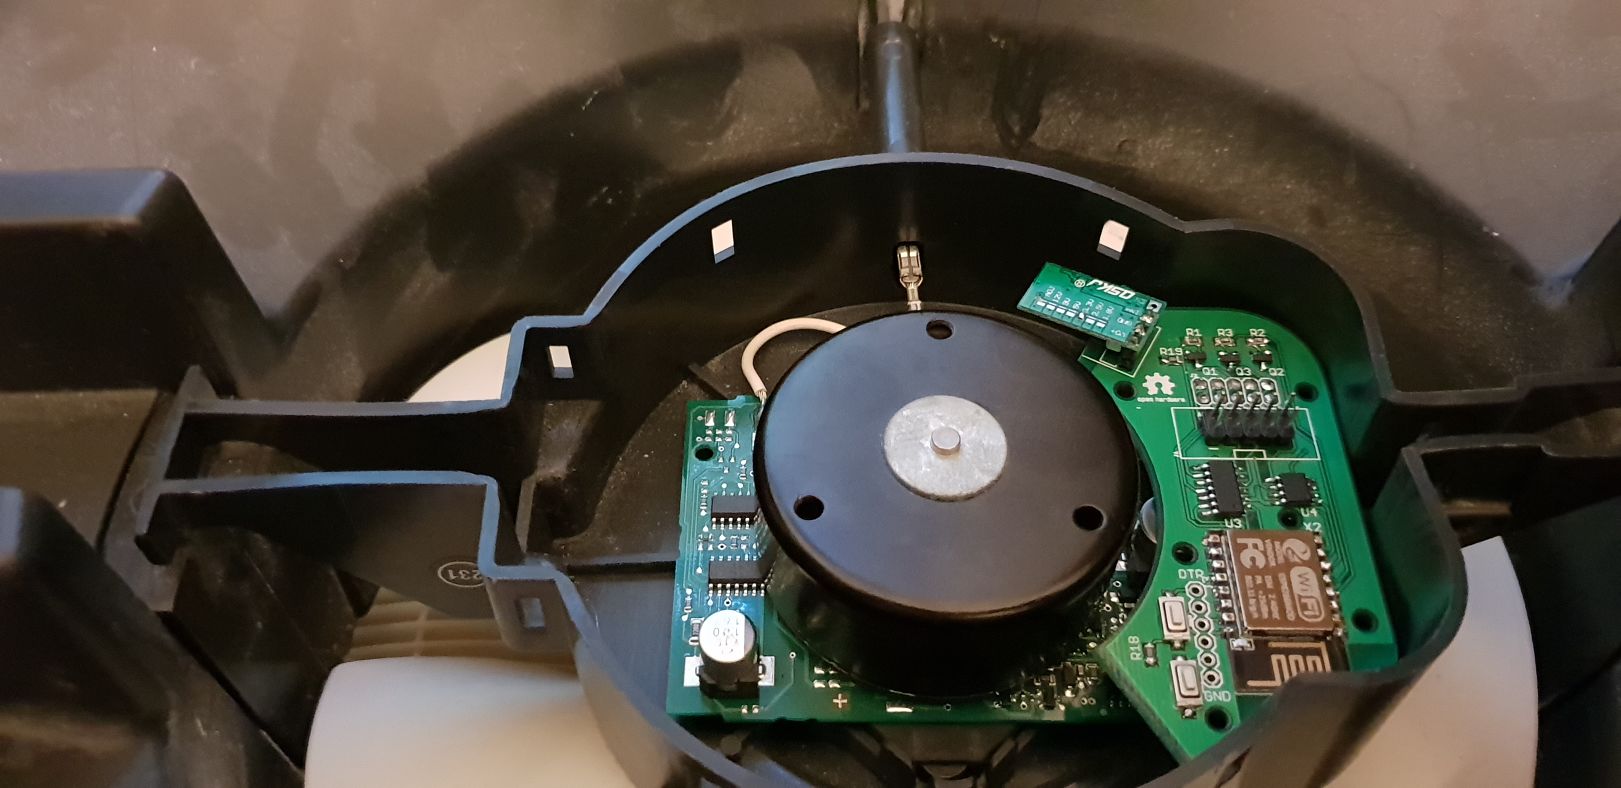 Actor saltar Lo anterior Venta Connected (WiFi control for Venta LW45 humidifier) | OpenHardware.io  - Enables Open Source Hardware Innovation